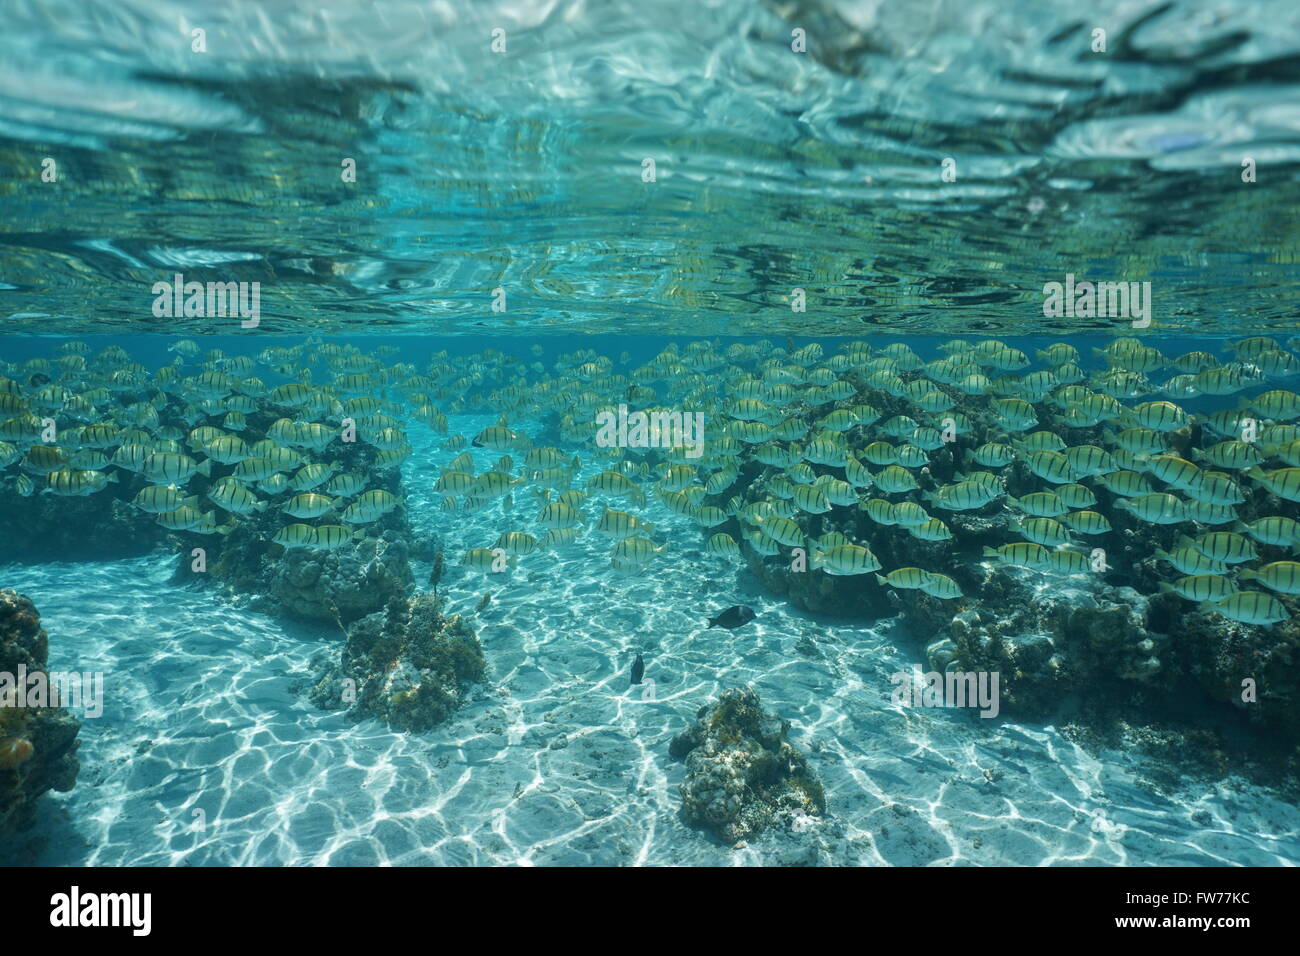 Underwater shoal of fish convict tang surgeonfish, lagoon of Huahine, Pacific ocean, French Polynesia Stock Photo